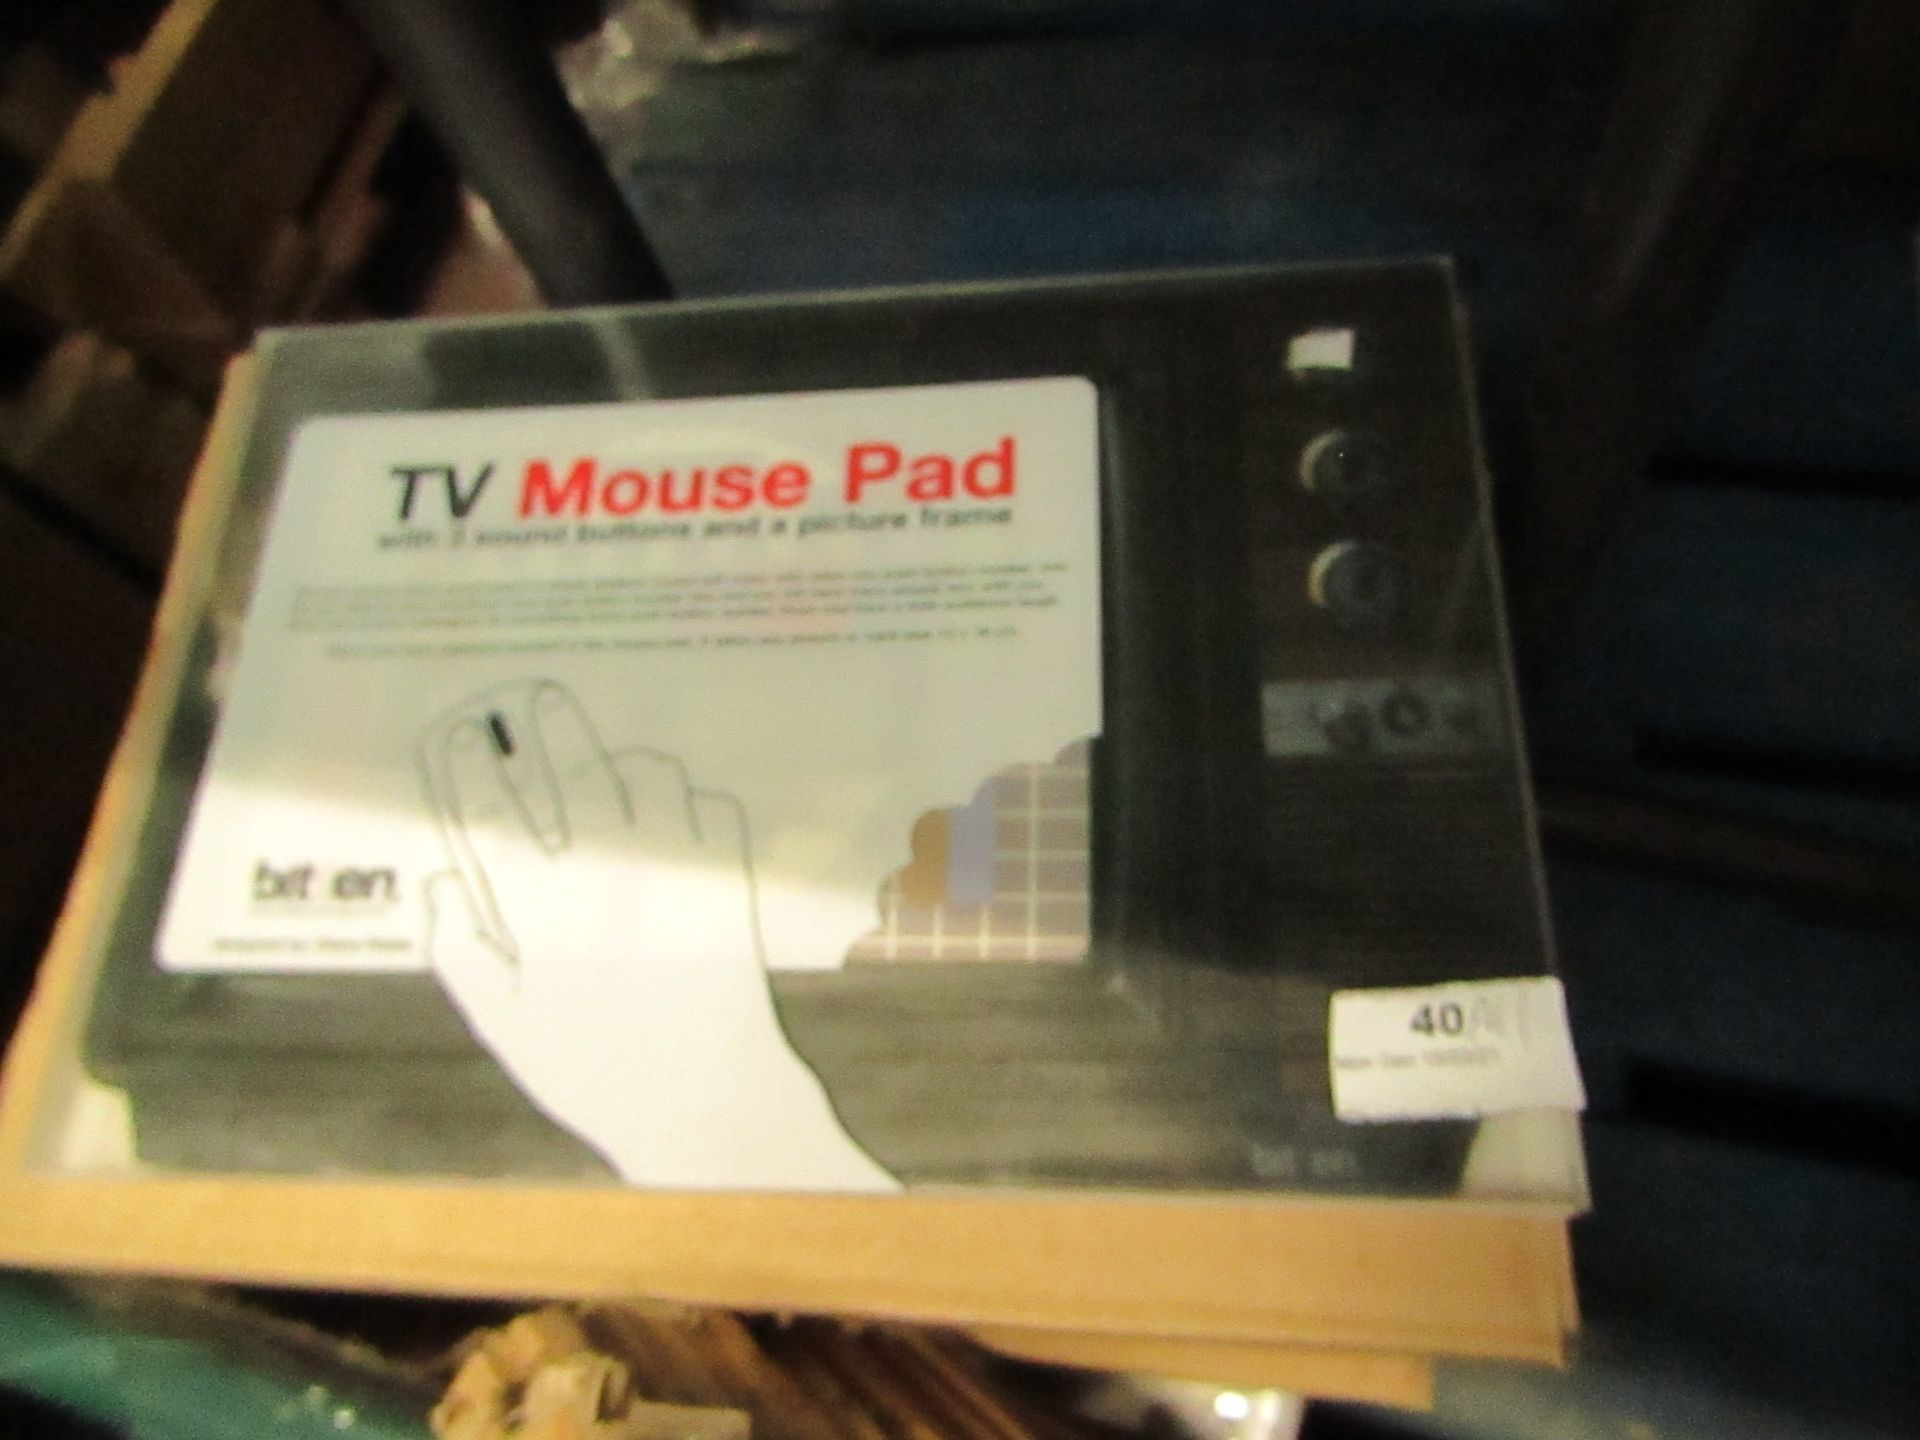 24x TV Mouse Pads - Unused & Boxed.